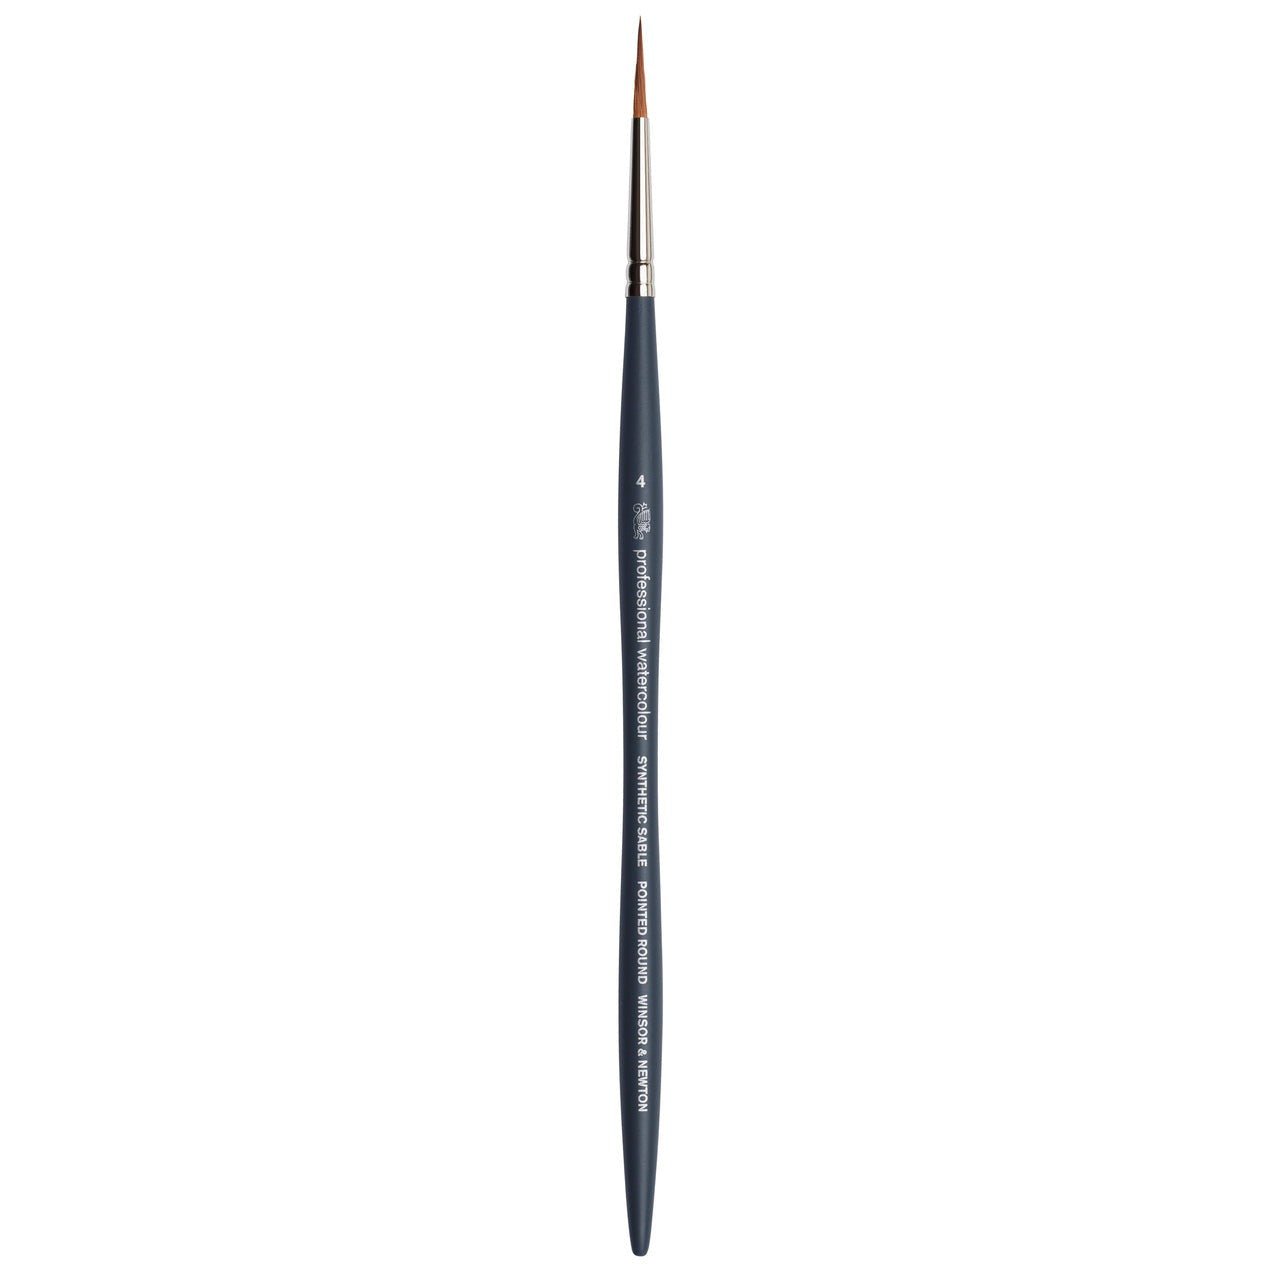 Winsor & Newton Professional Watercolor Synthetic Sable Brush - Pointed Round 4 - merriartist.com